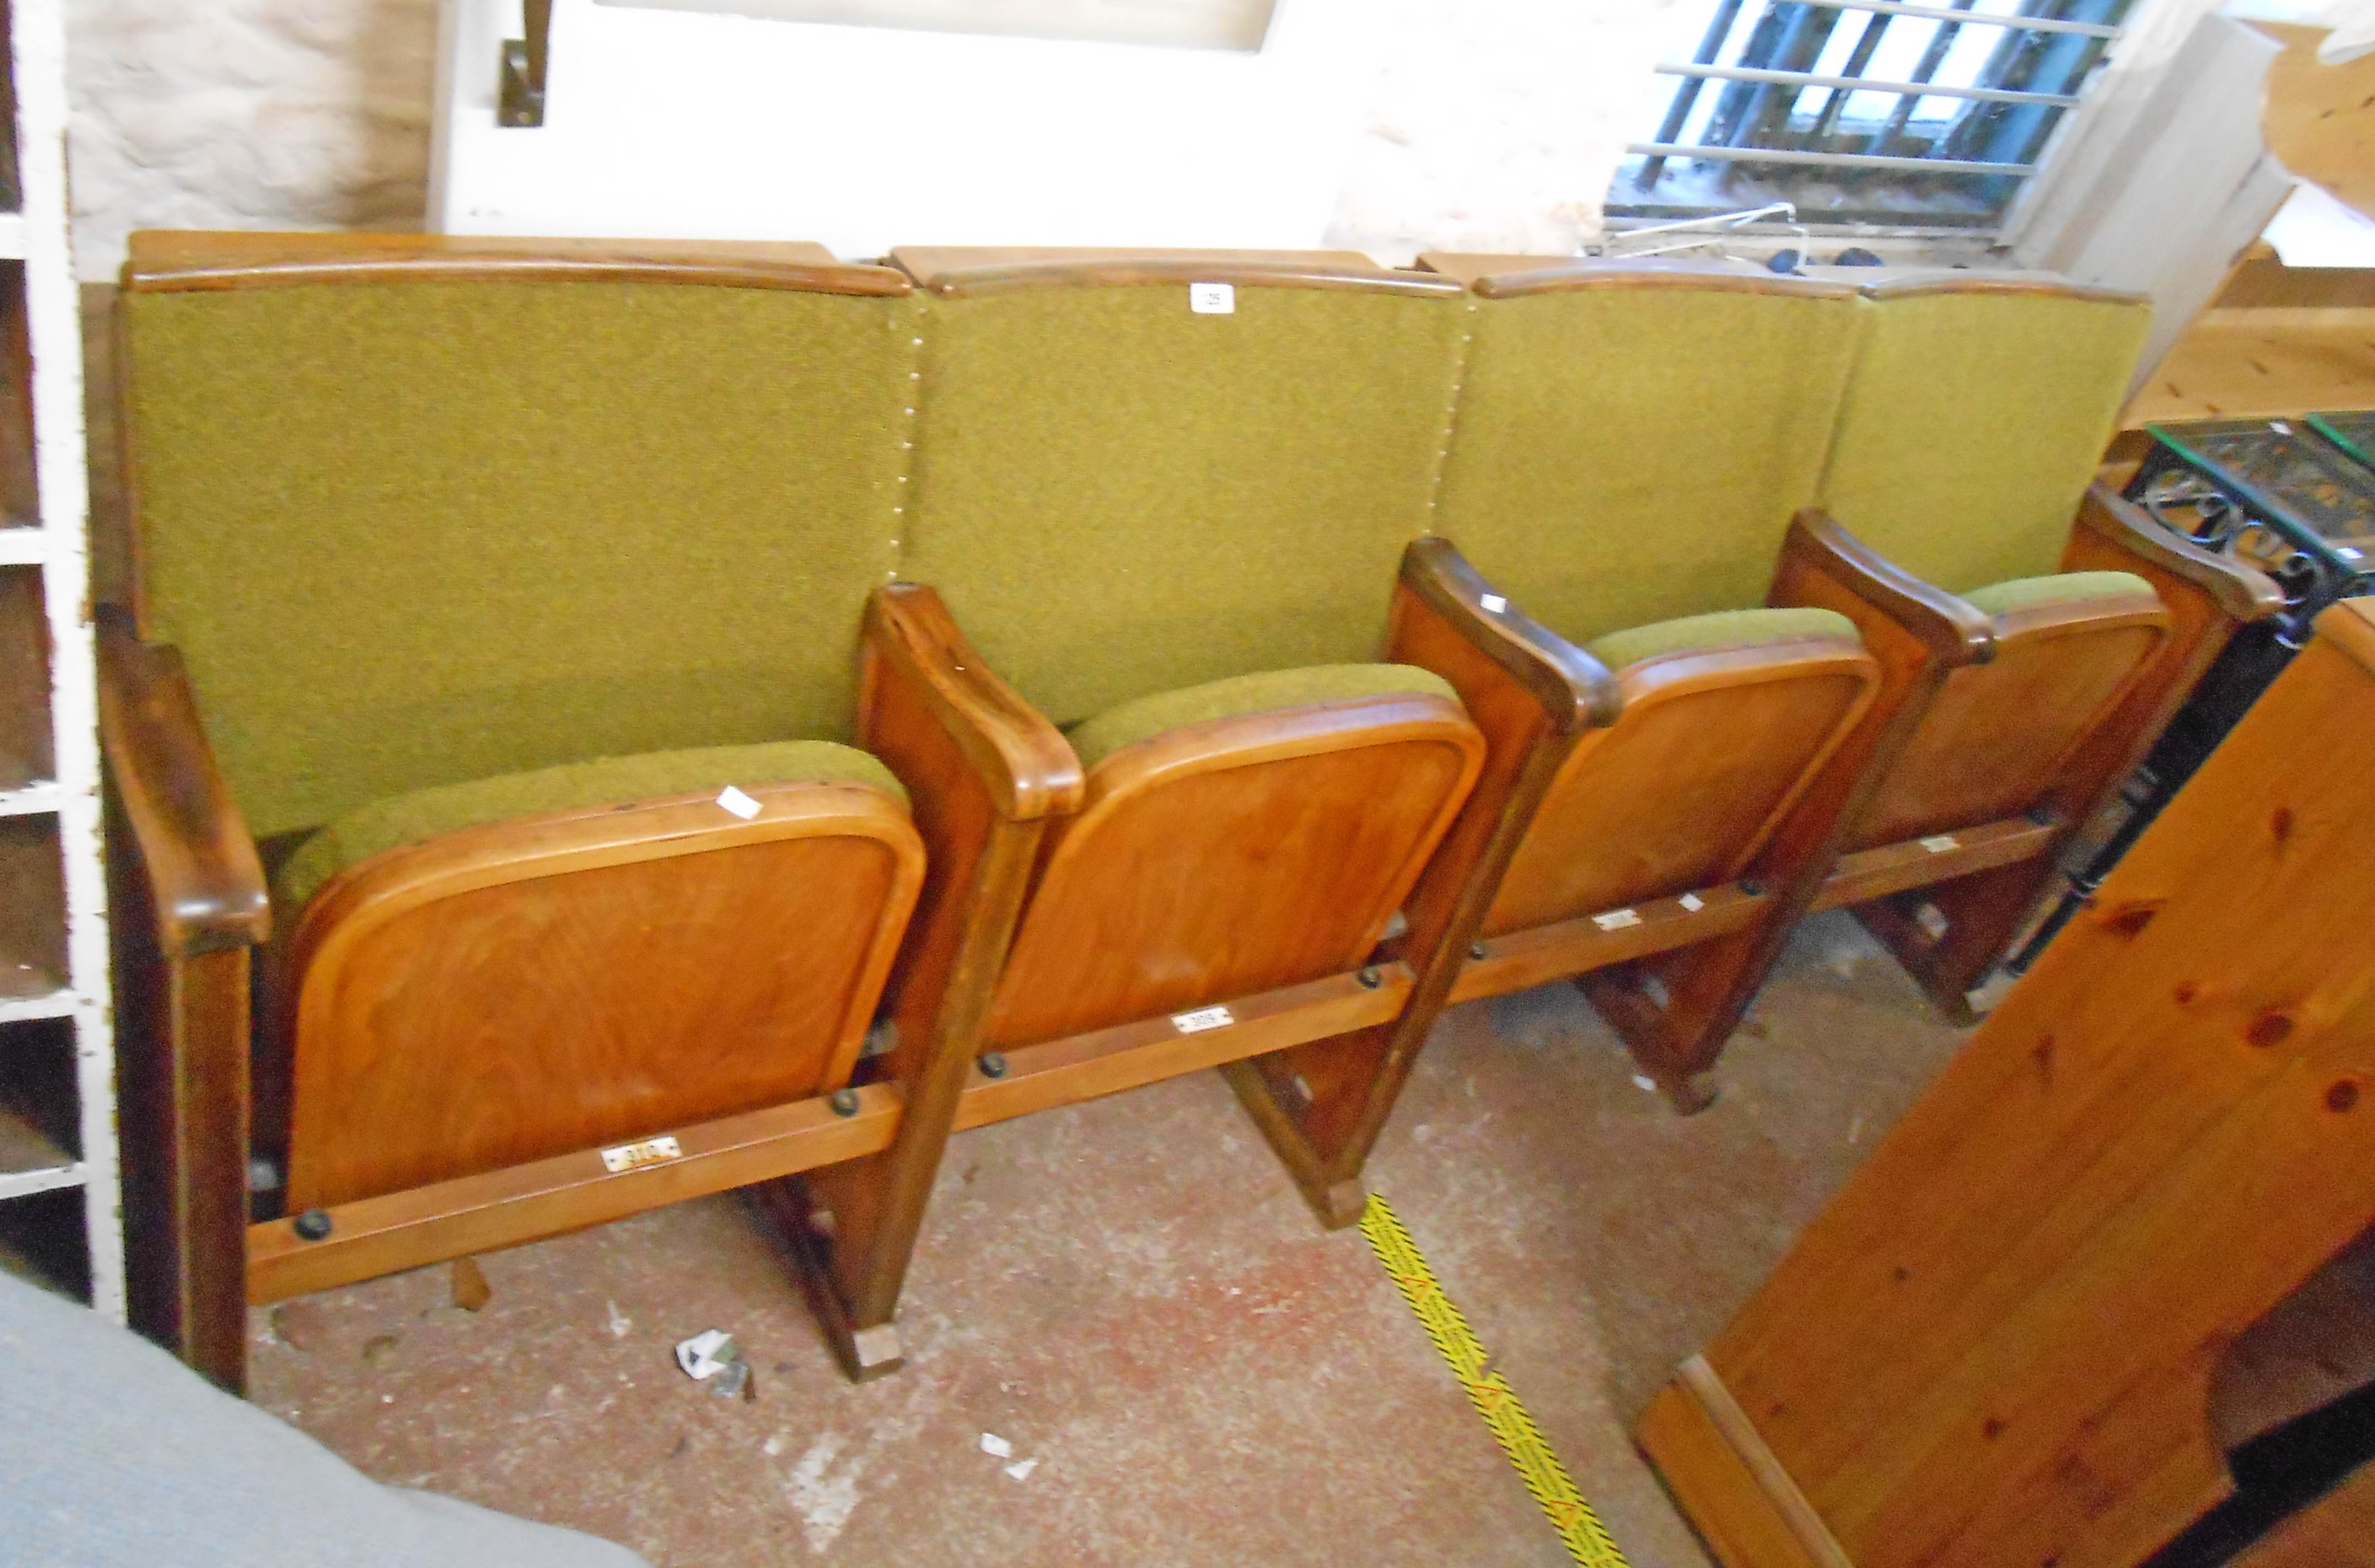 A row of four vintage cinema seats with polished wood part show frames, moulded arm rests and